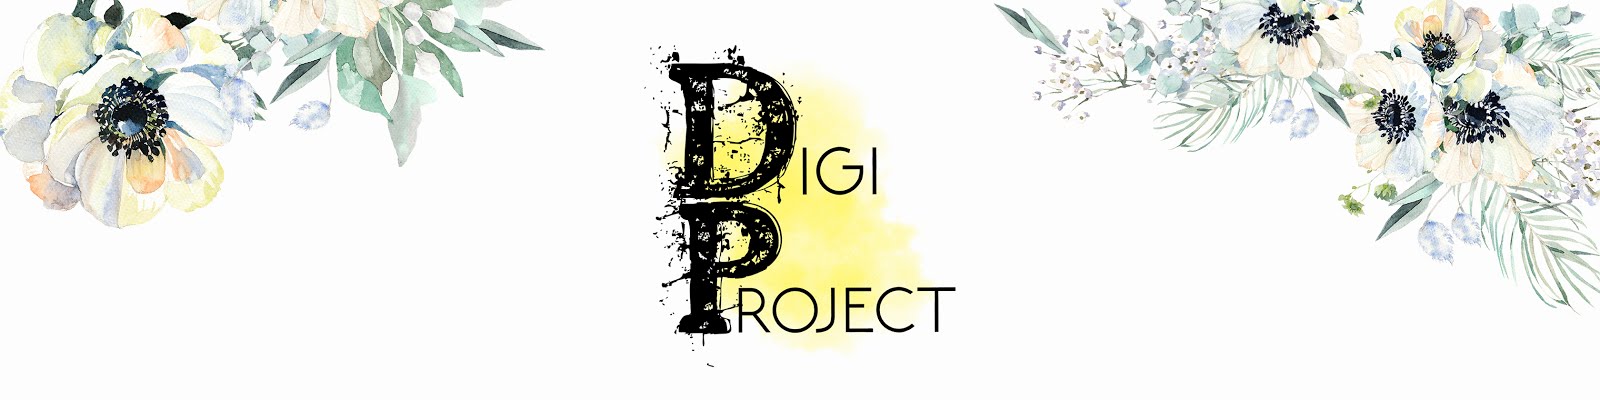 DigiProject 